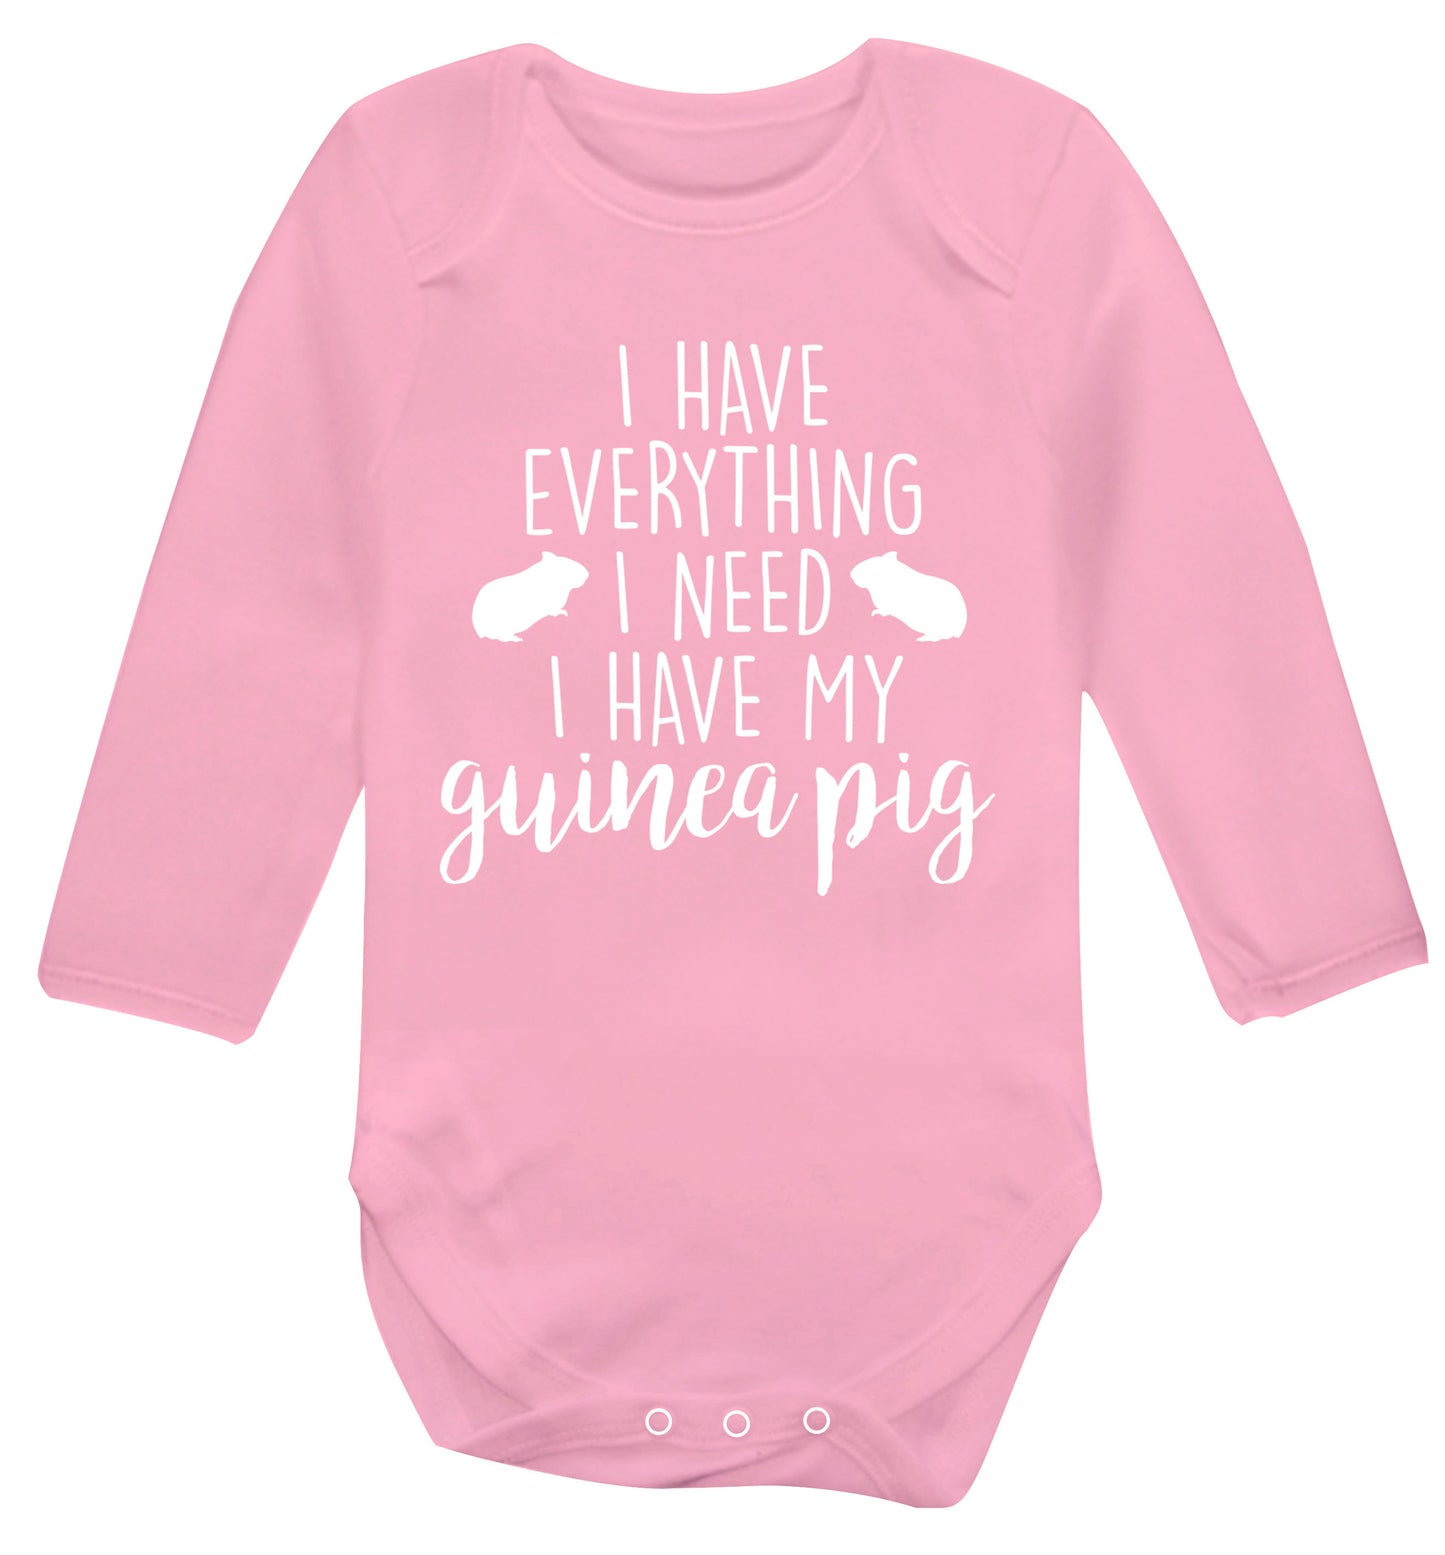 I have everything I need, I have my guinea pig Baby Vest long sleeved pale pink 6-12 months